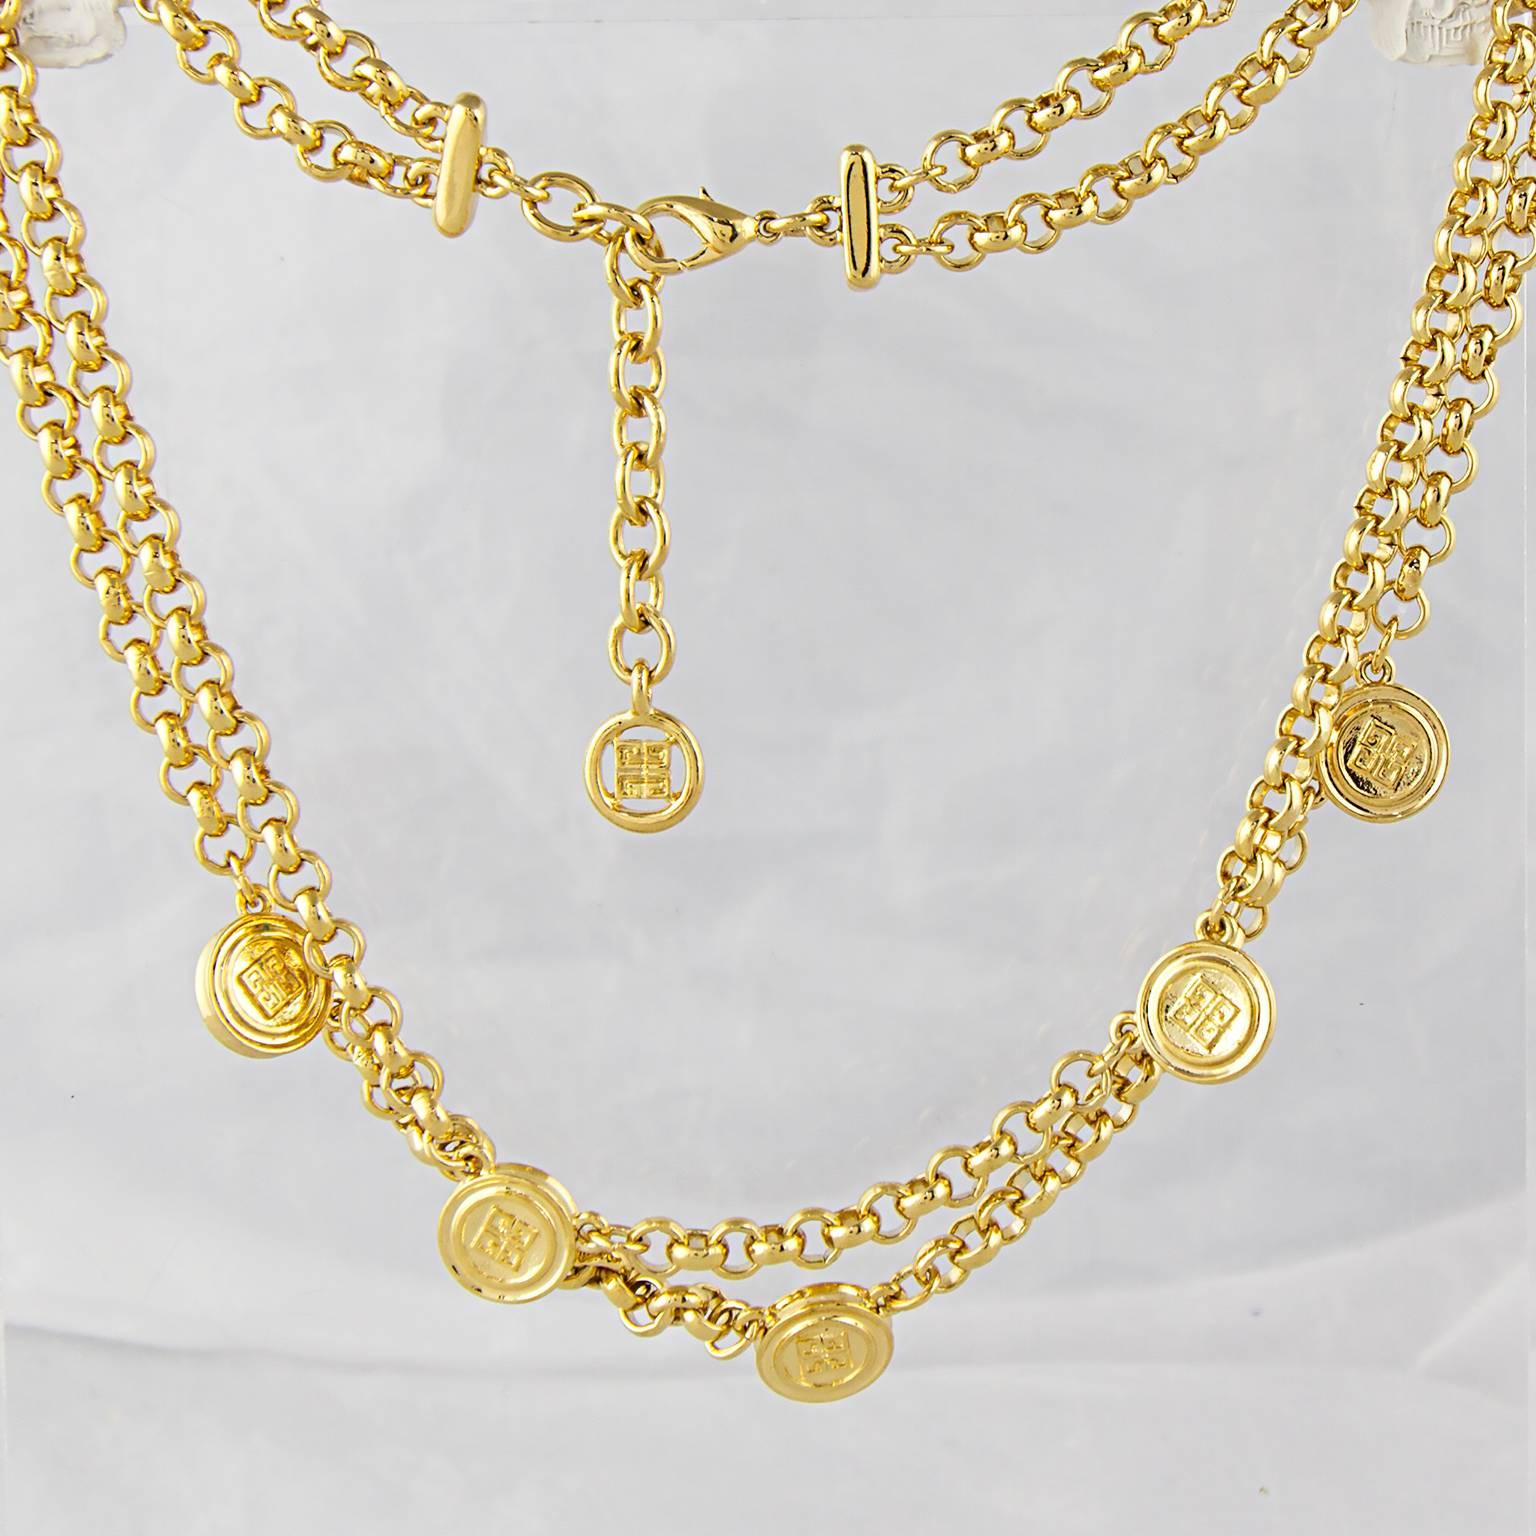 A high carat gold plate Givenchy double chain necklace with logo charms.
Made in the 1990's.
Fully signed. 
In a perfect condition. 
Don't hesitate to contact us with any queries or image requests.